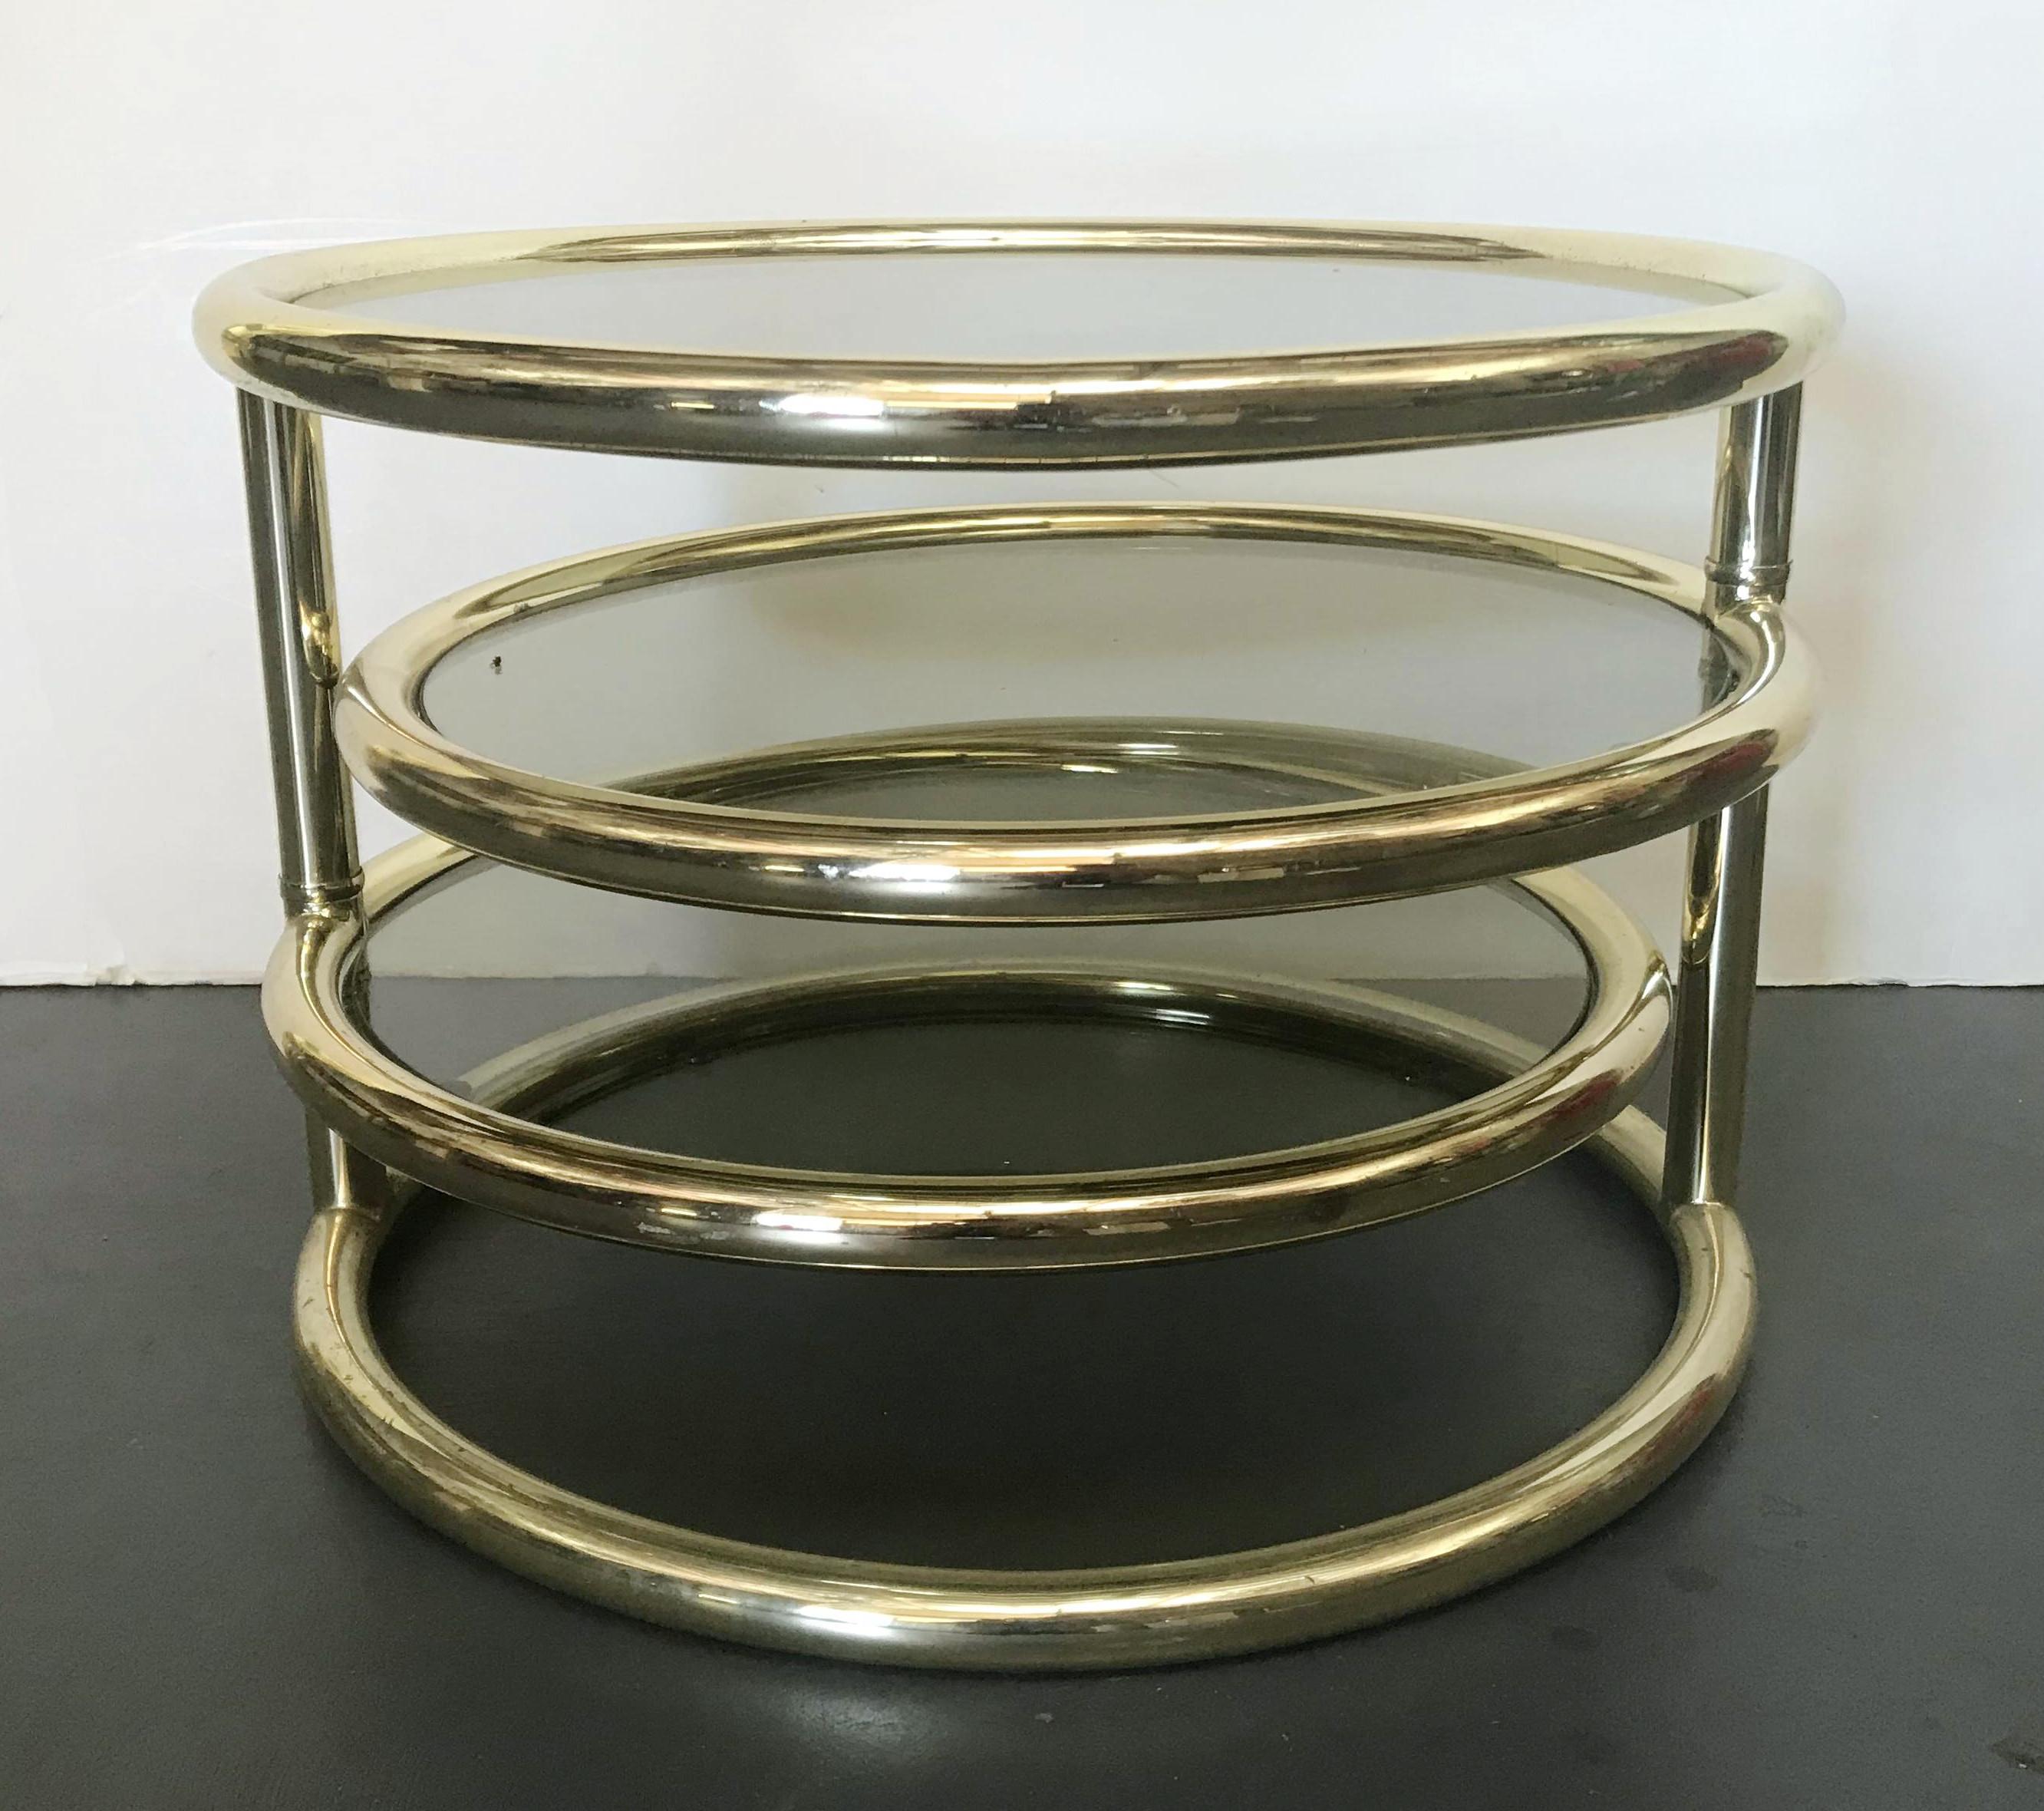 Vintage swiveling round coffee table with 3 tiers of smoky glass shelves on brass-plated metal frame / Made in Italy, circa 1970s
Original 